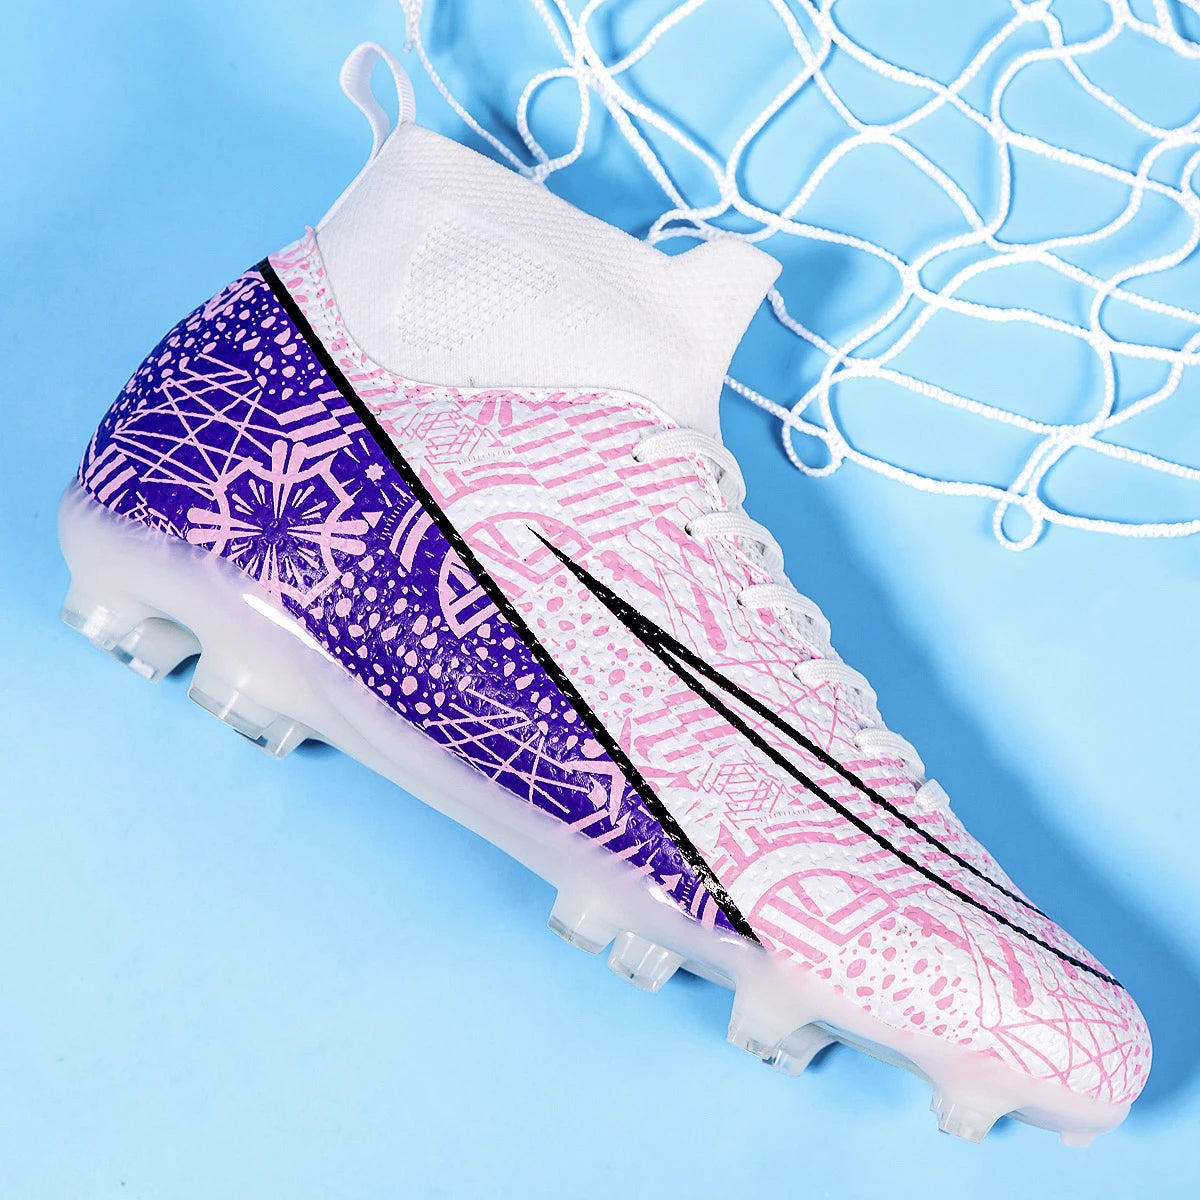 Kids / Youth High Ankle Pink Soccer Cleats for Firm Ground.